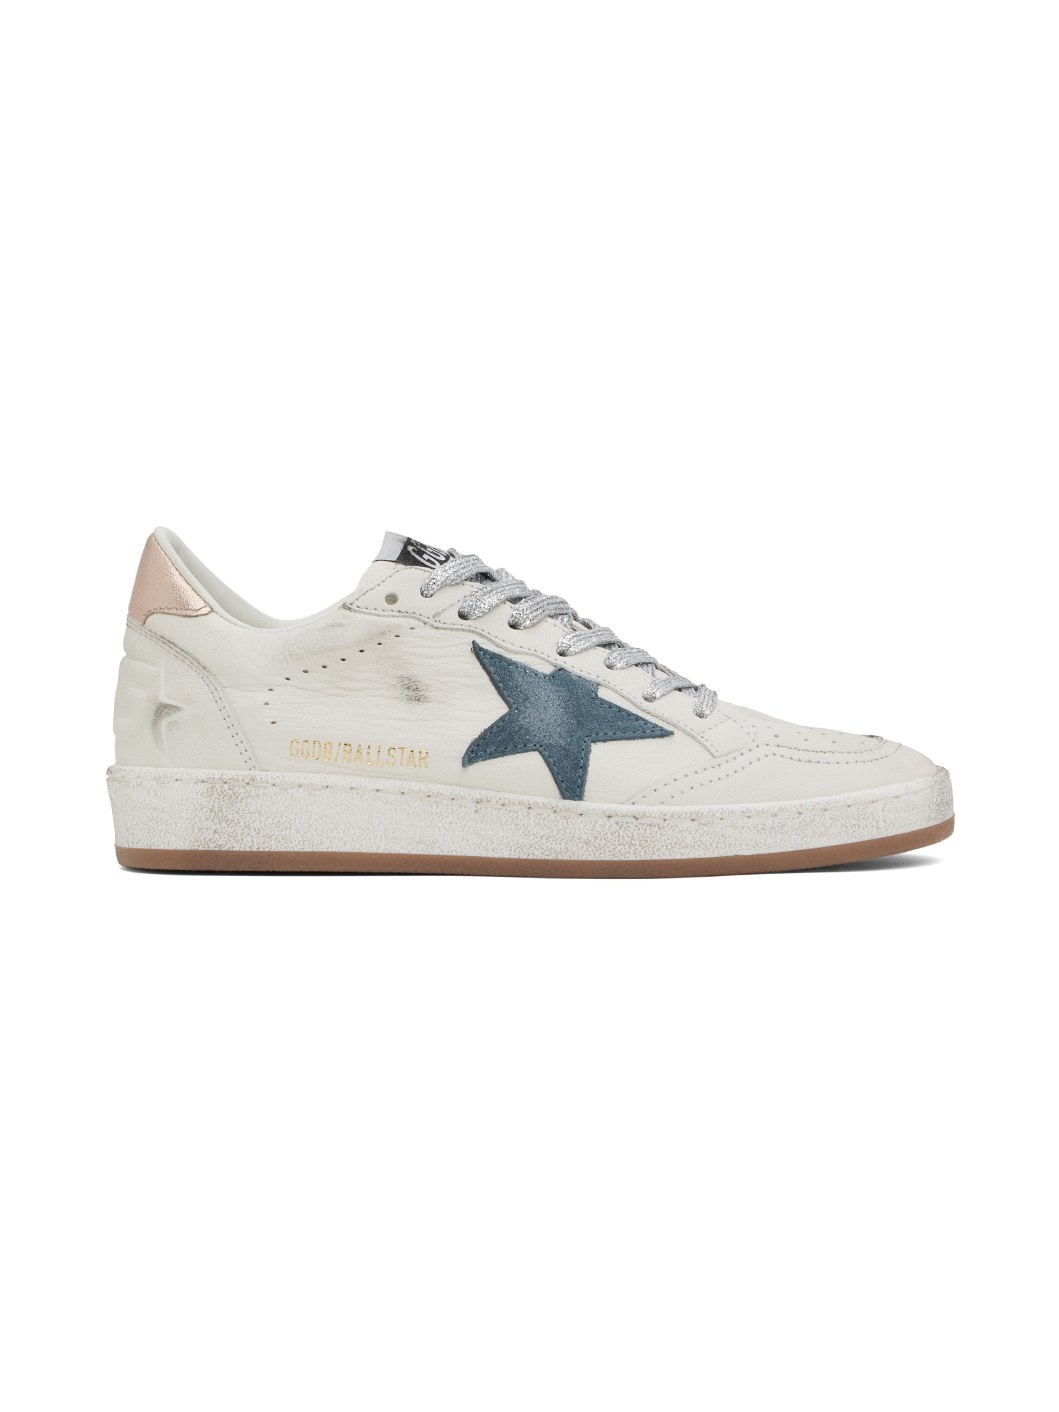 Off-White Ball Star Sneakers - 1